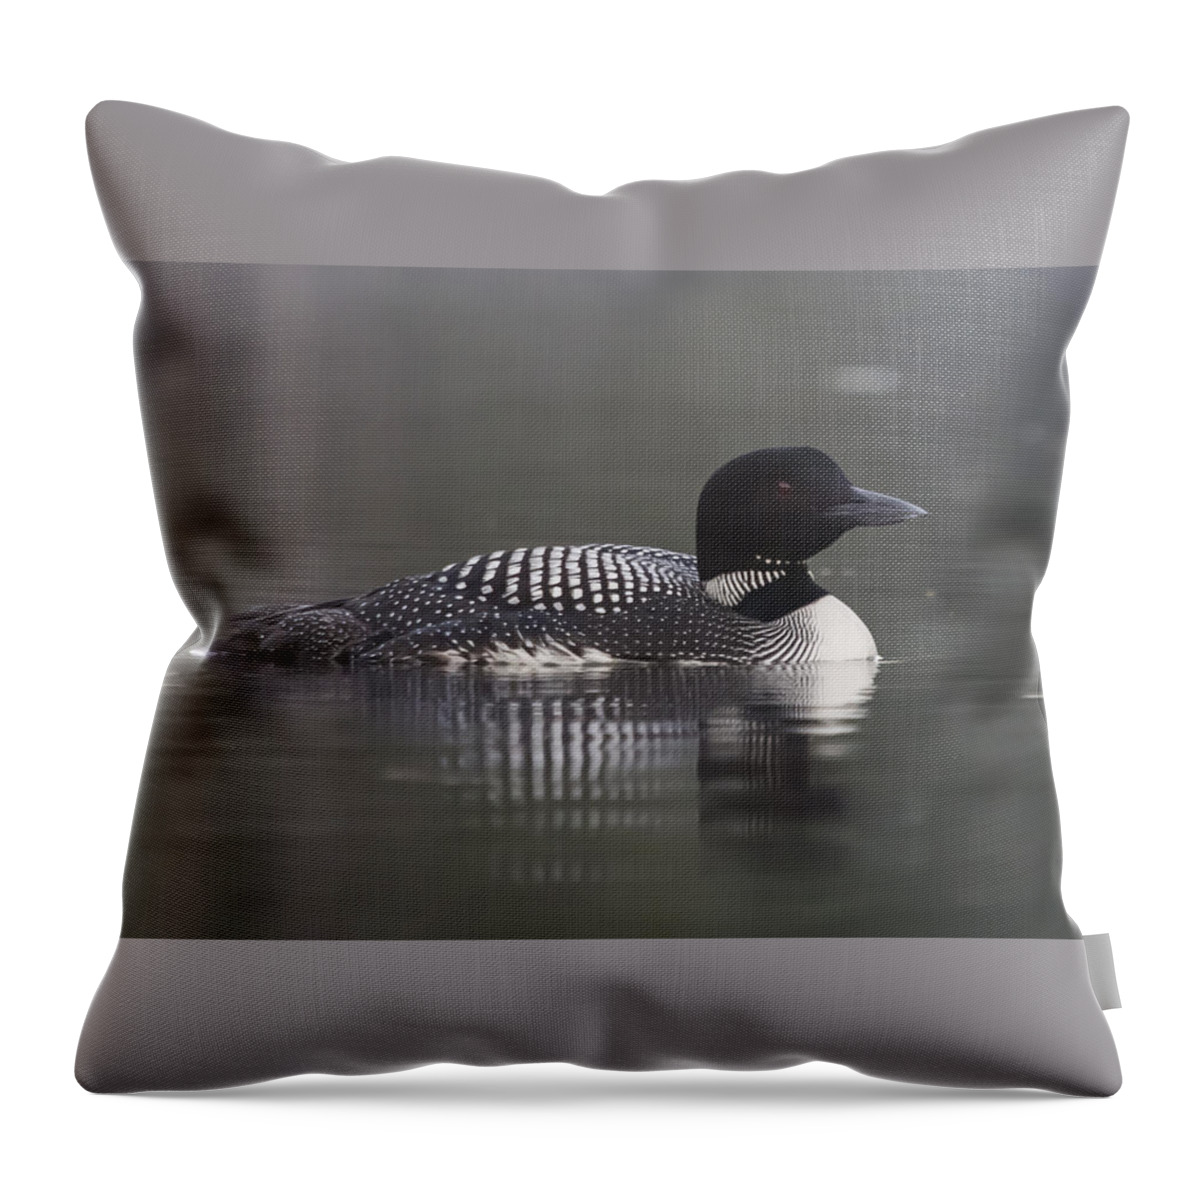 Loon Throw Pillow featuring the photograph Loon 4 by Vance Bell